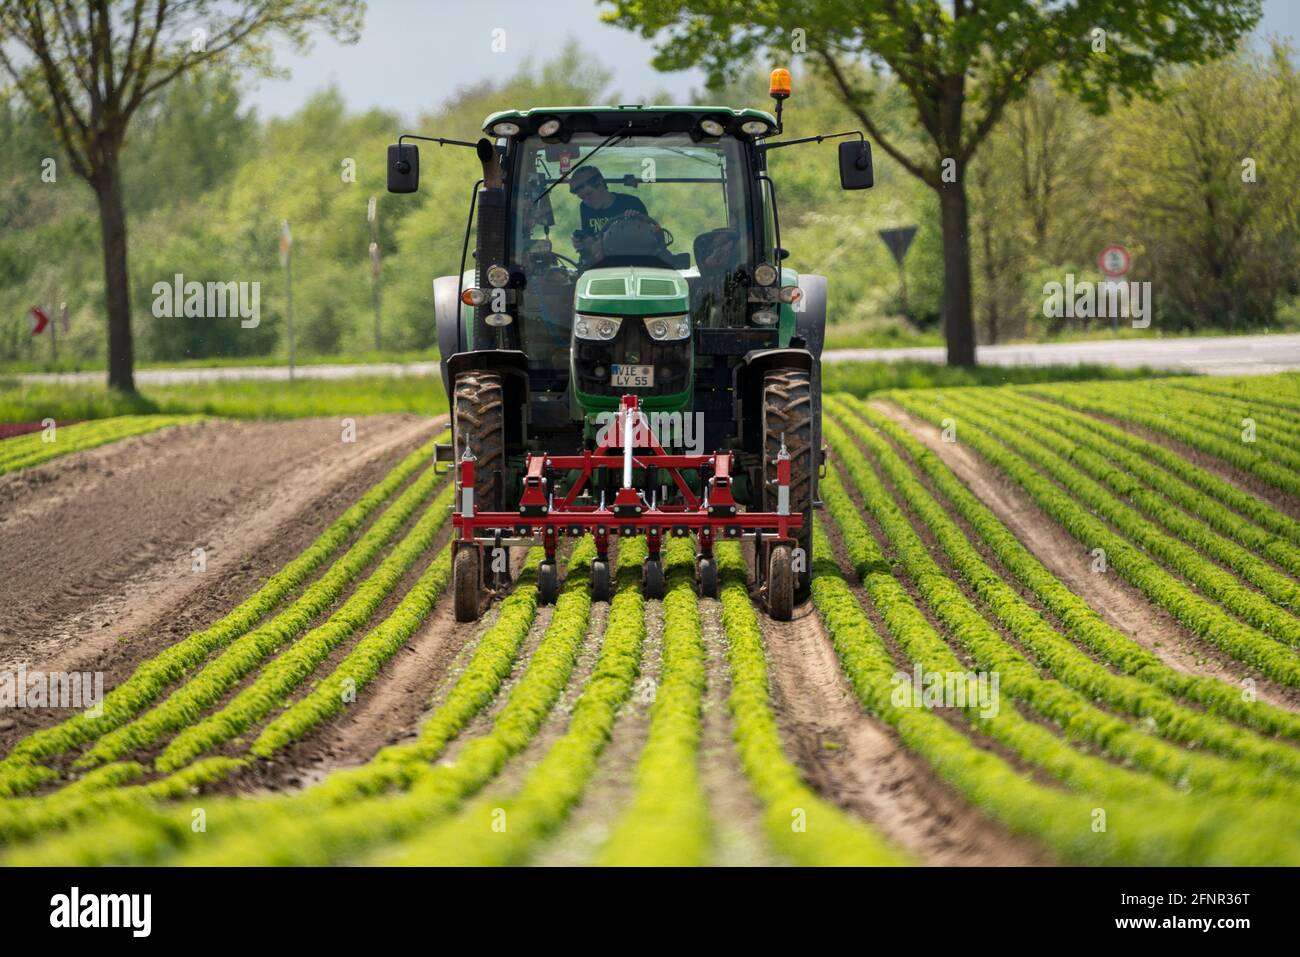 Agriculture, lettuce growing in a field, Lollo Bionda and Lollo Rossa, in long rows of plants, working the field with a finger hoe removing the weeds, Stock Photo